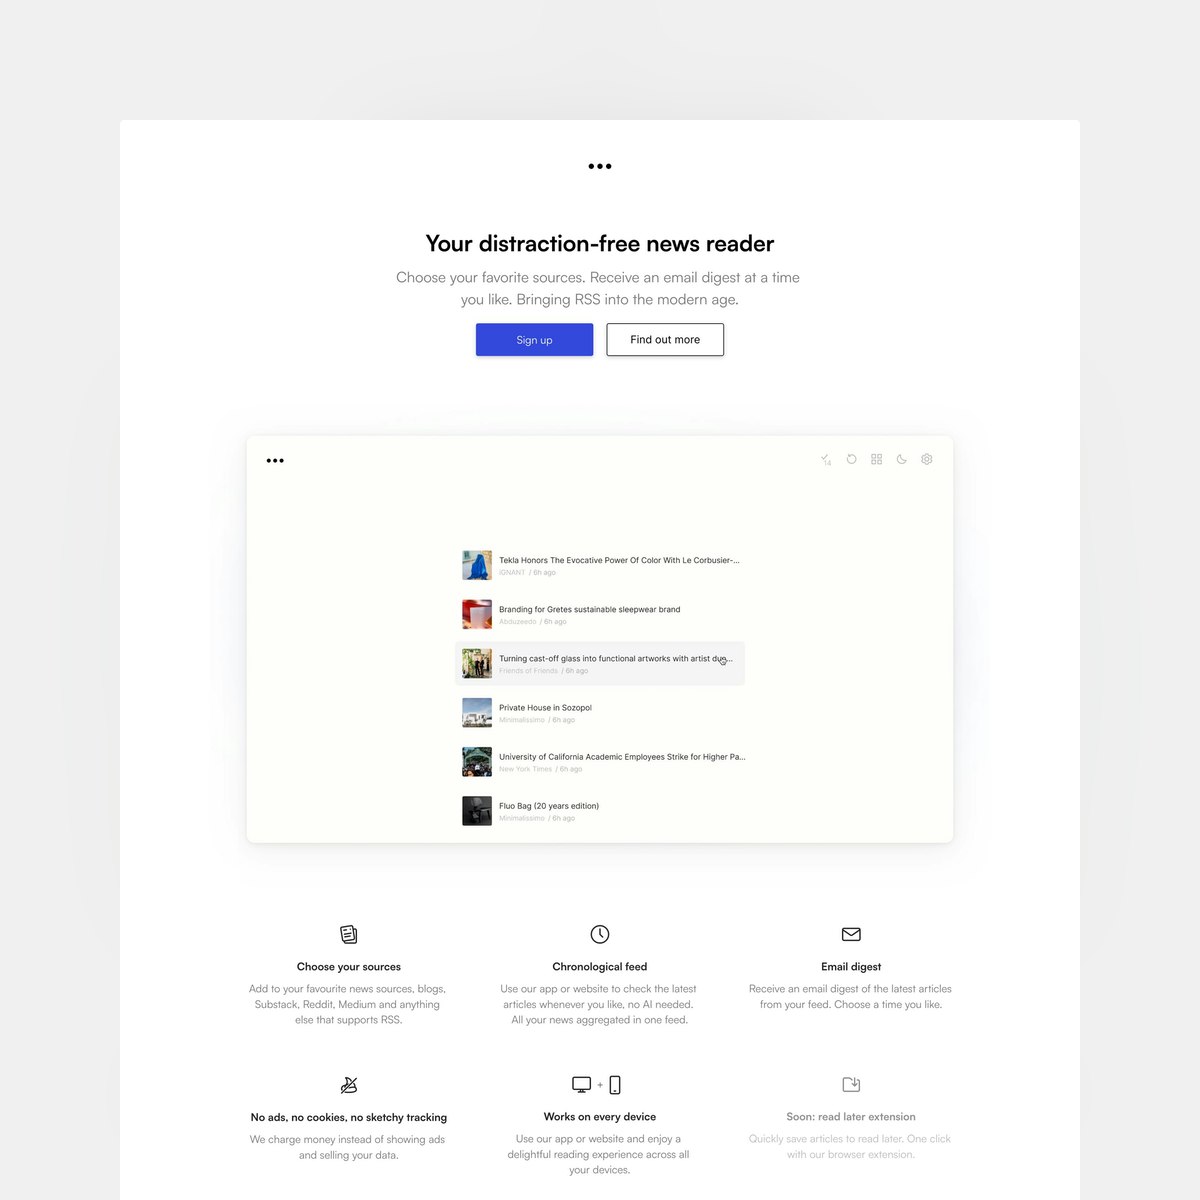 Product Page screen design idea #330: Website Inspiration: Sortable